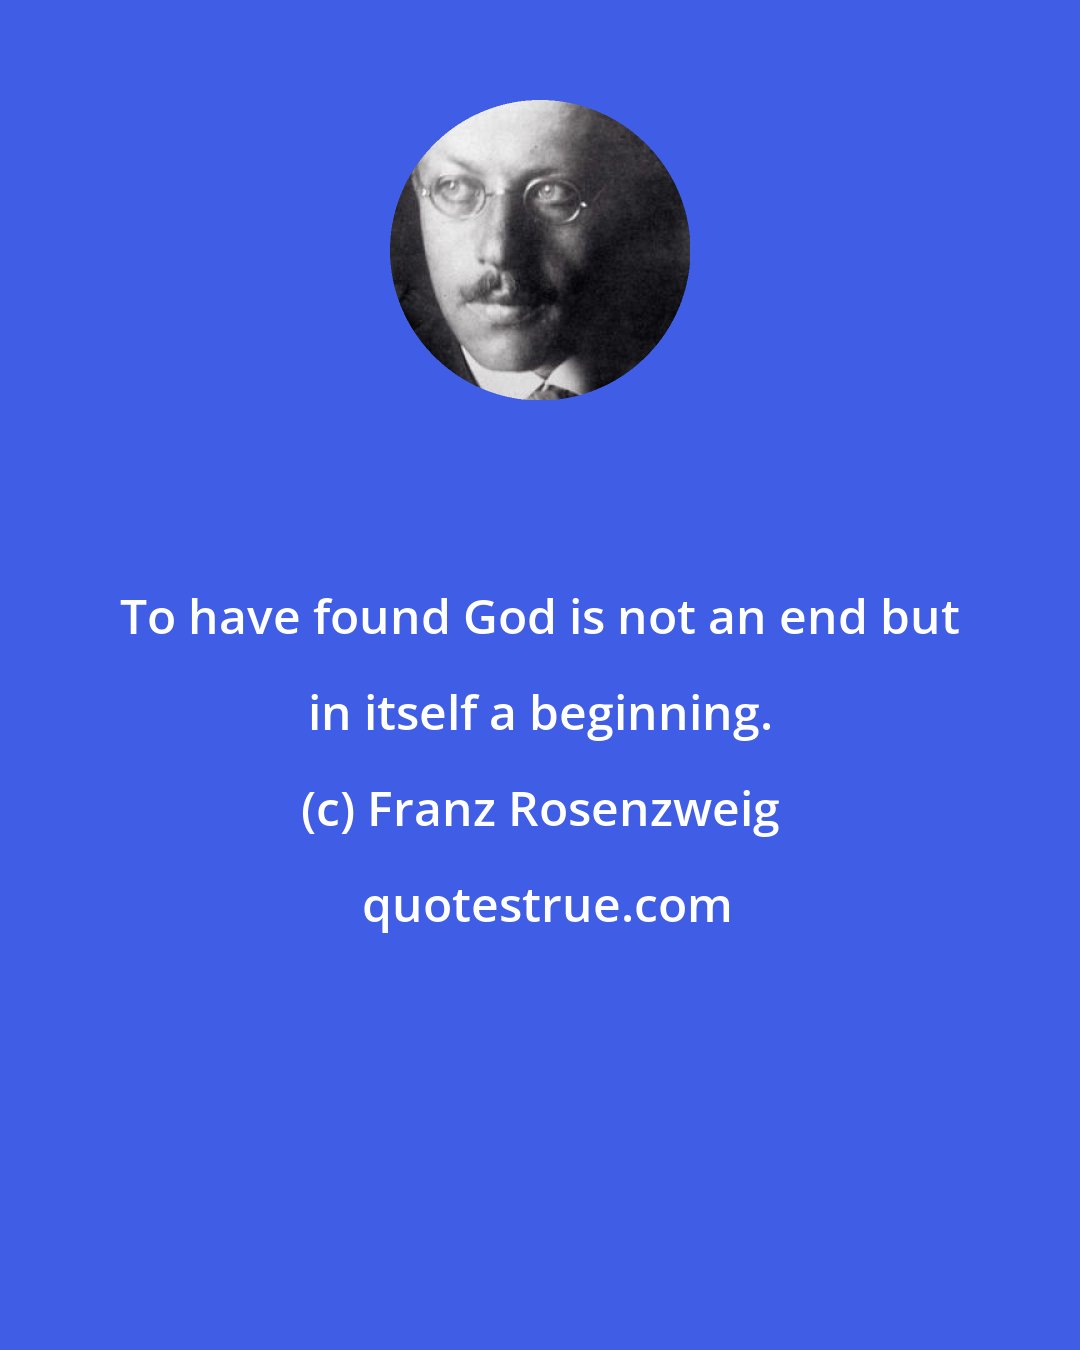 Franz Rosenzweig: To have found God is not an end but in itself a beginning.